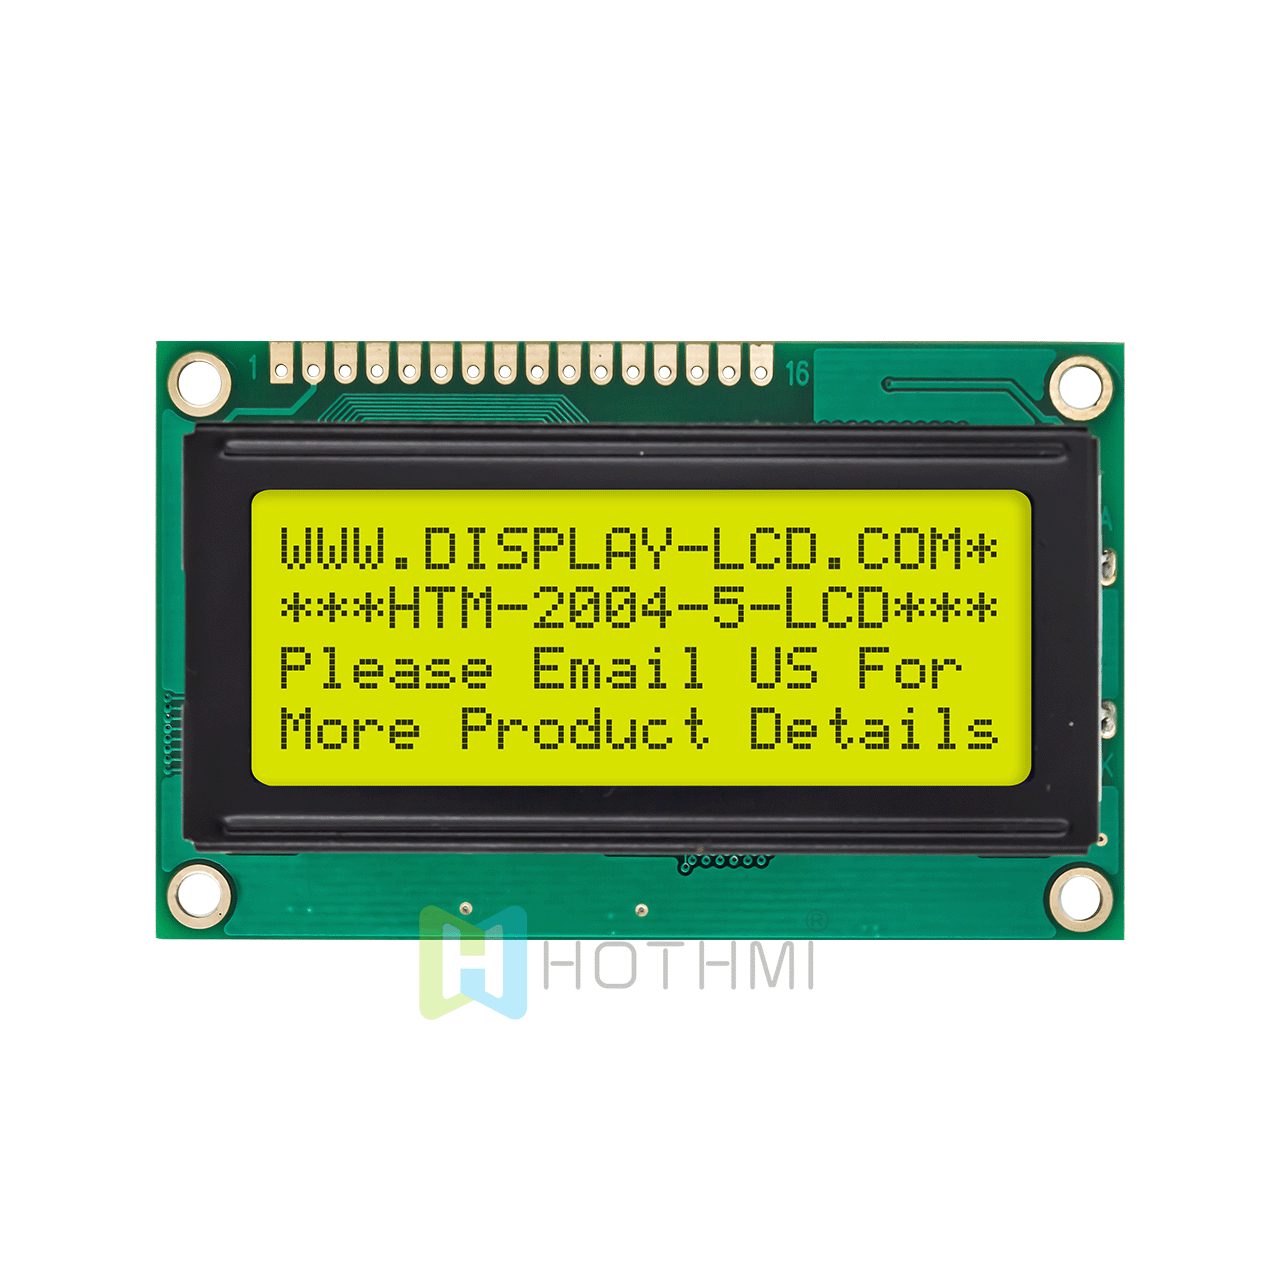 4X20 monochrome character LCD module/STN positive display/yellow-green backlight/Arduino/transflective LCD display/3.3v/5.0v